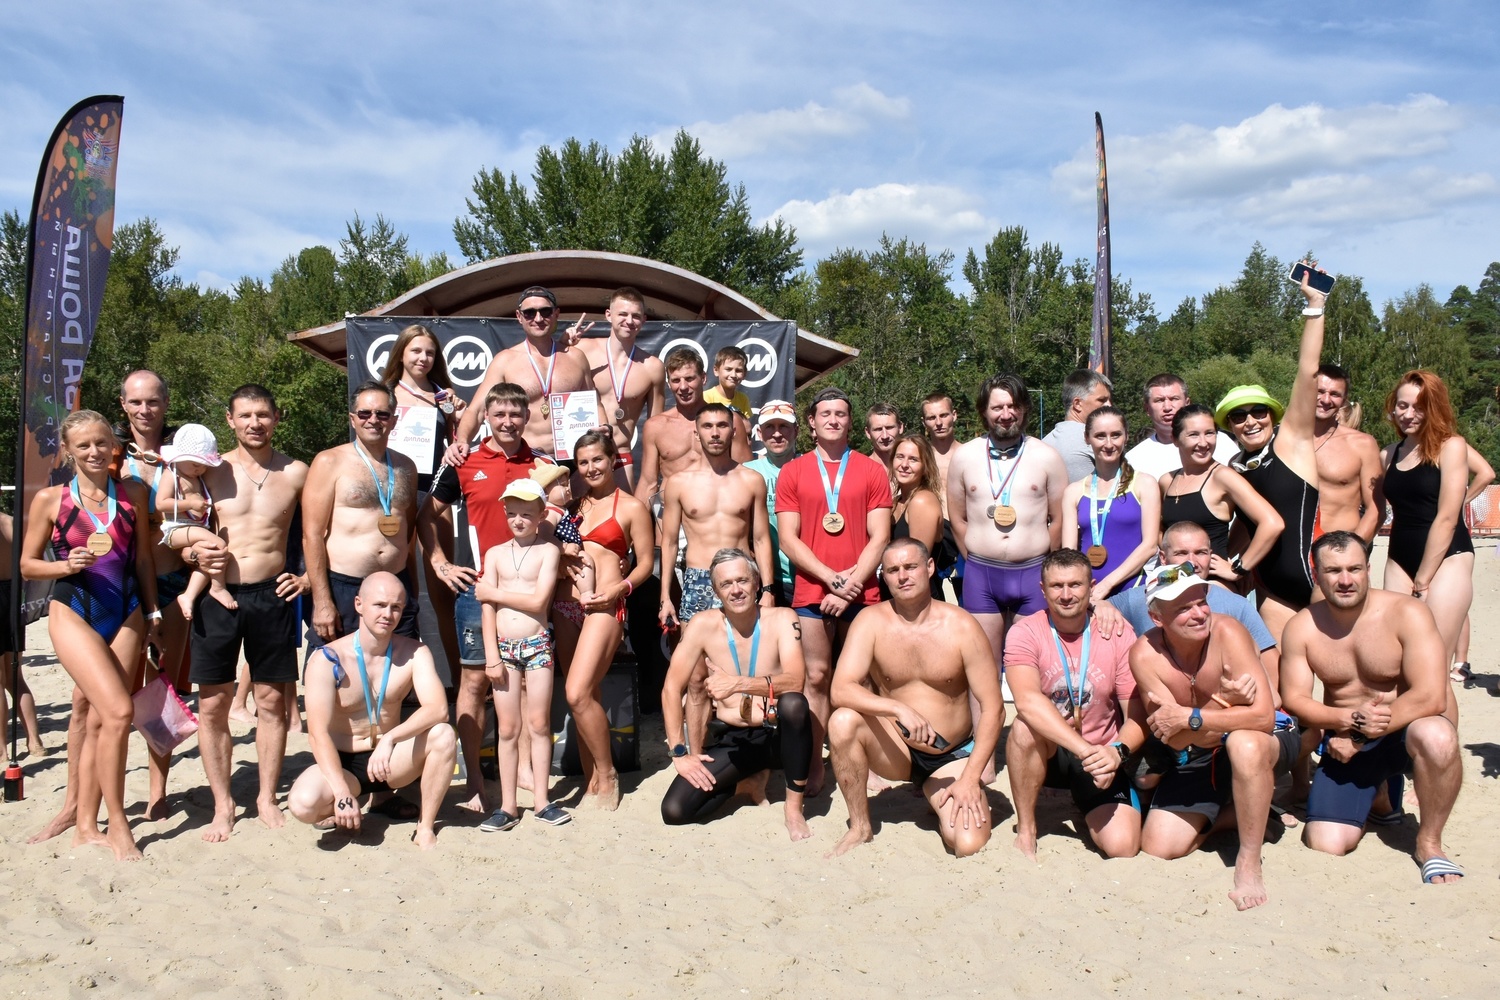 The annual open water swim took place in Gus-Khrustalny